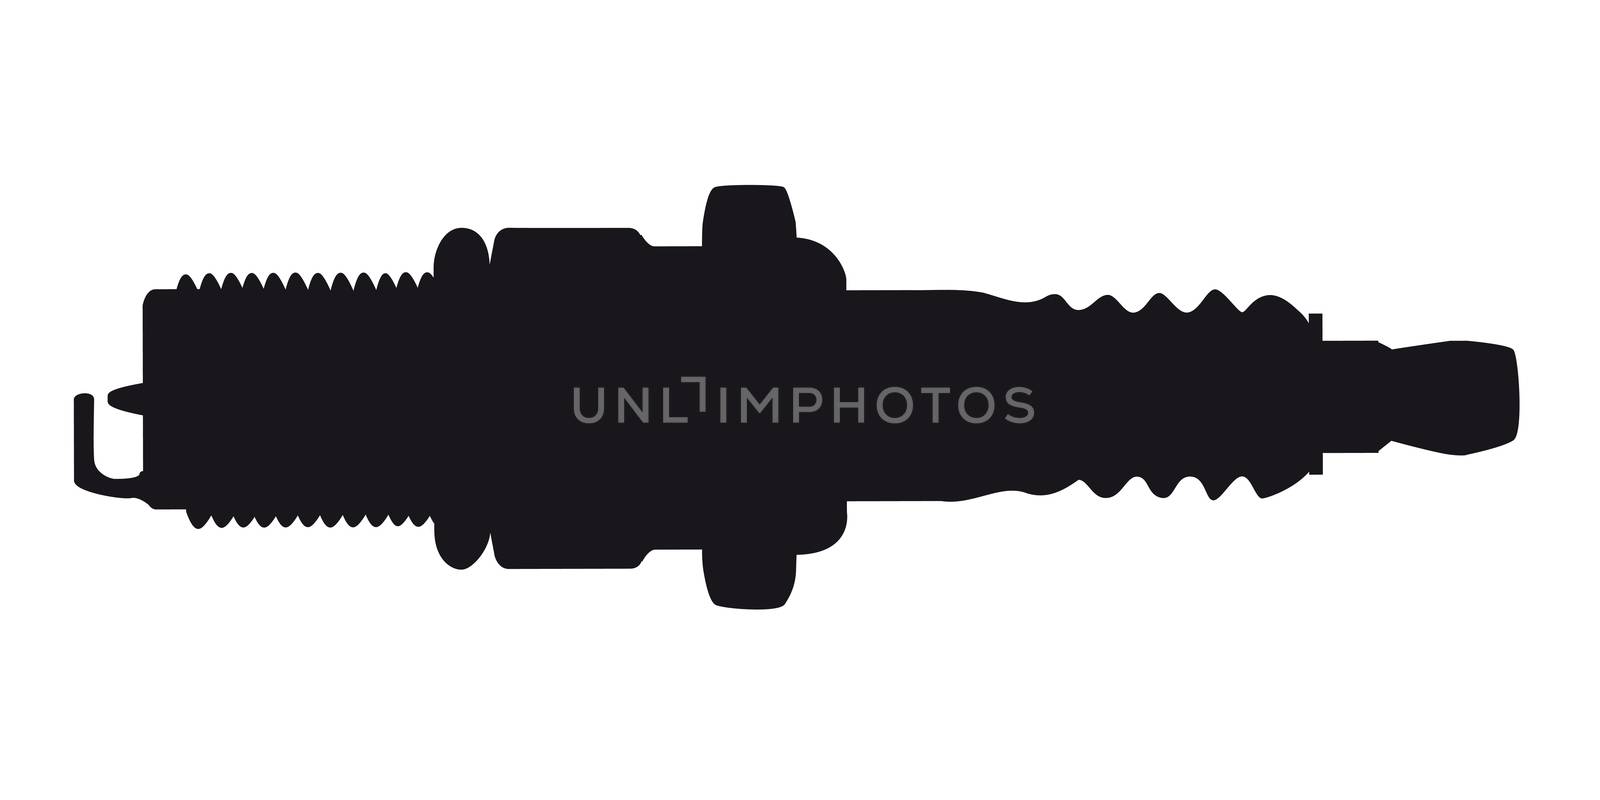 A spark plug in silhouette on a white background